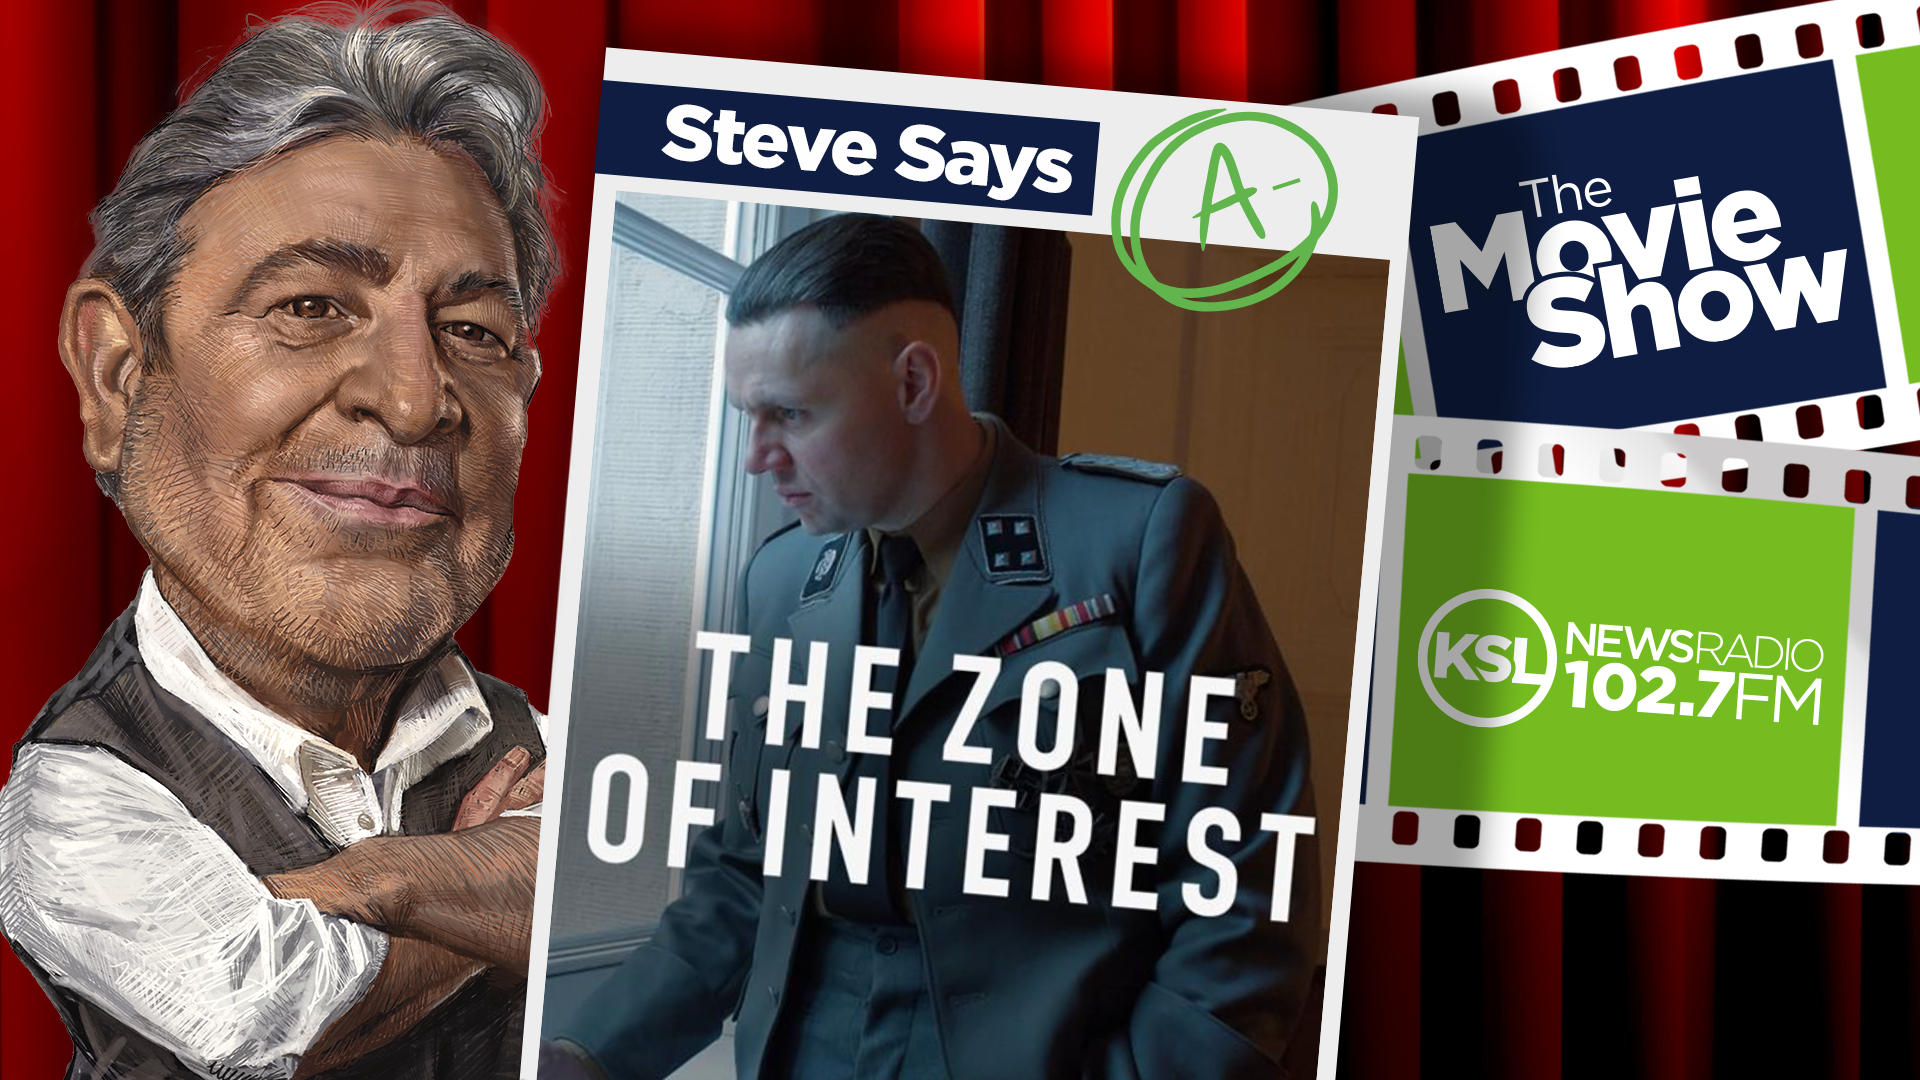 The Zone of Interest...